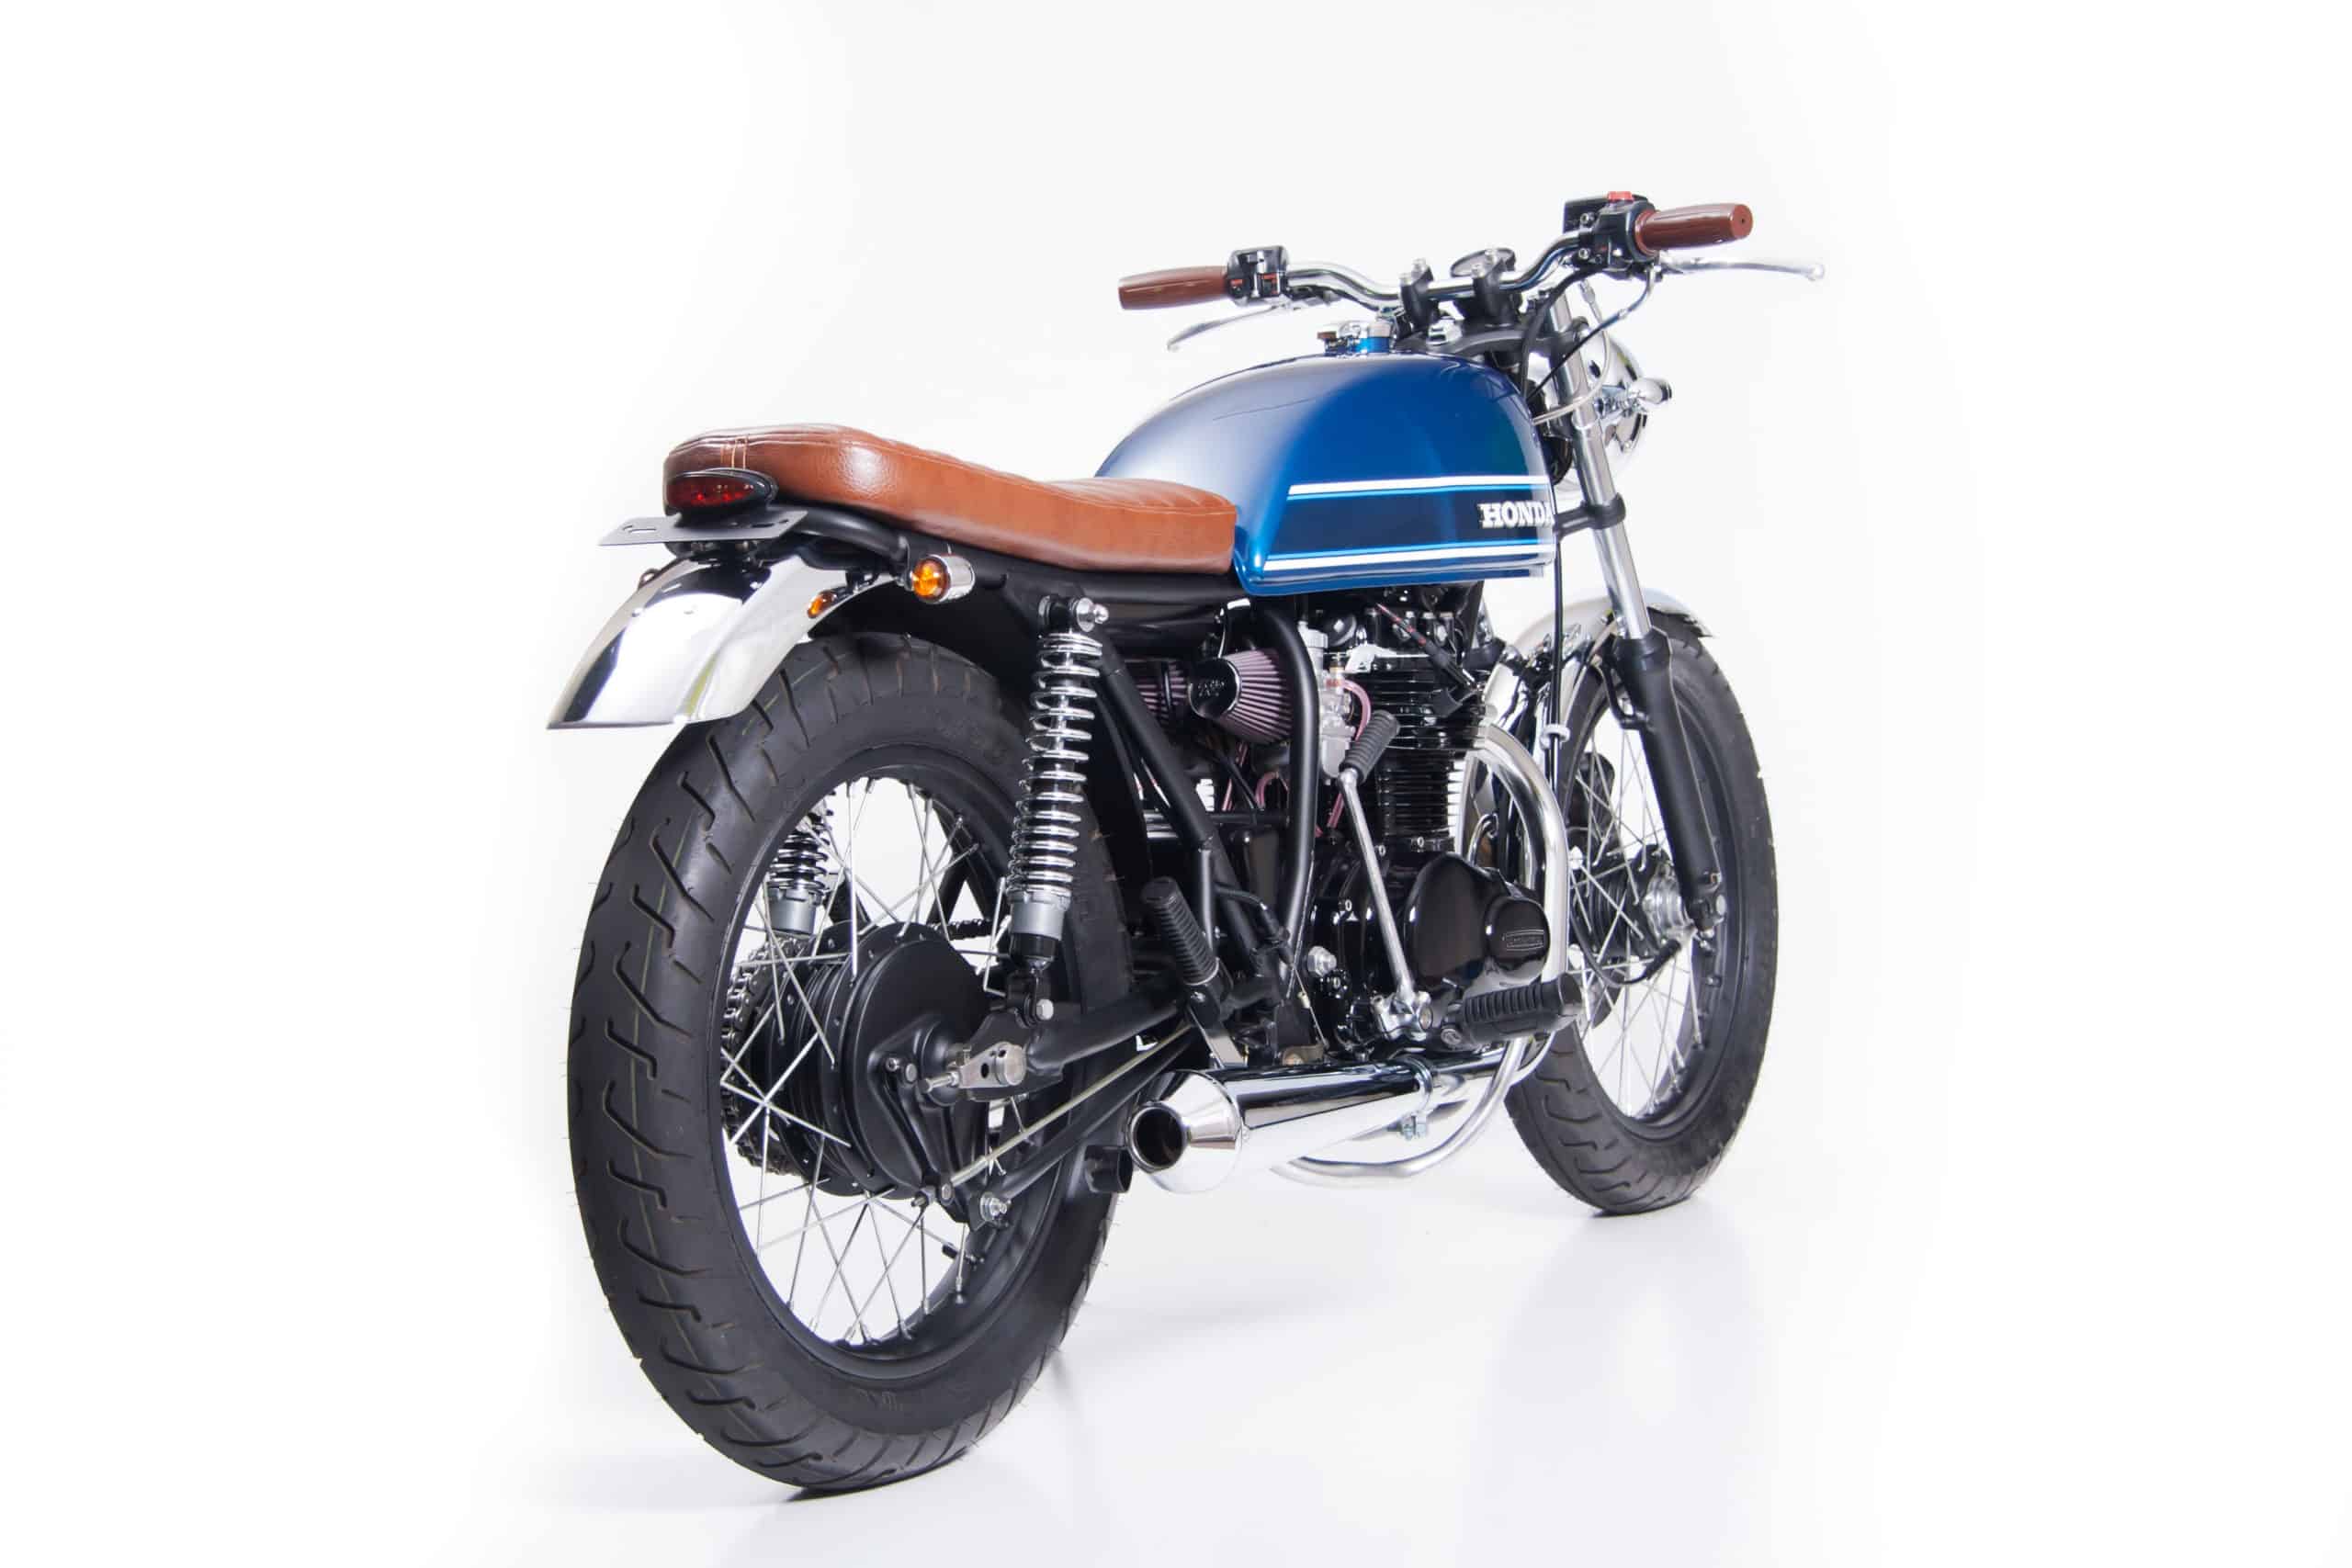 Custom exhaust, seat, fenders, controls and much more compliment the tank from a CB500T